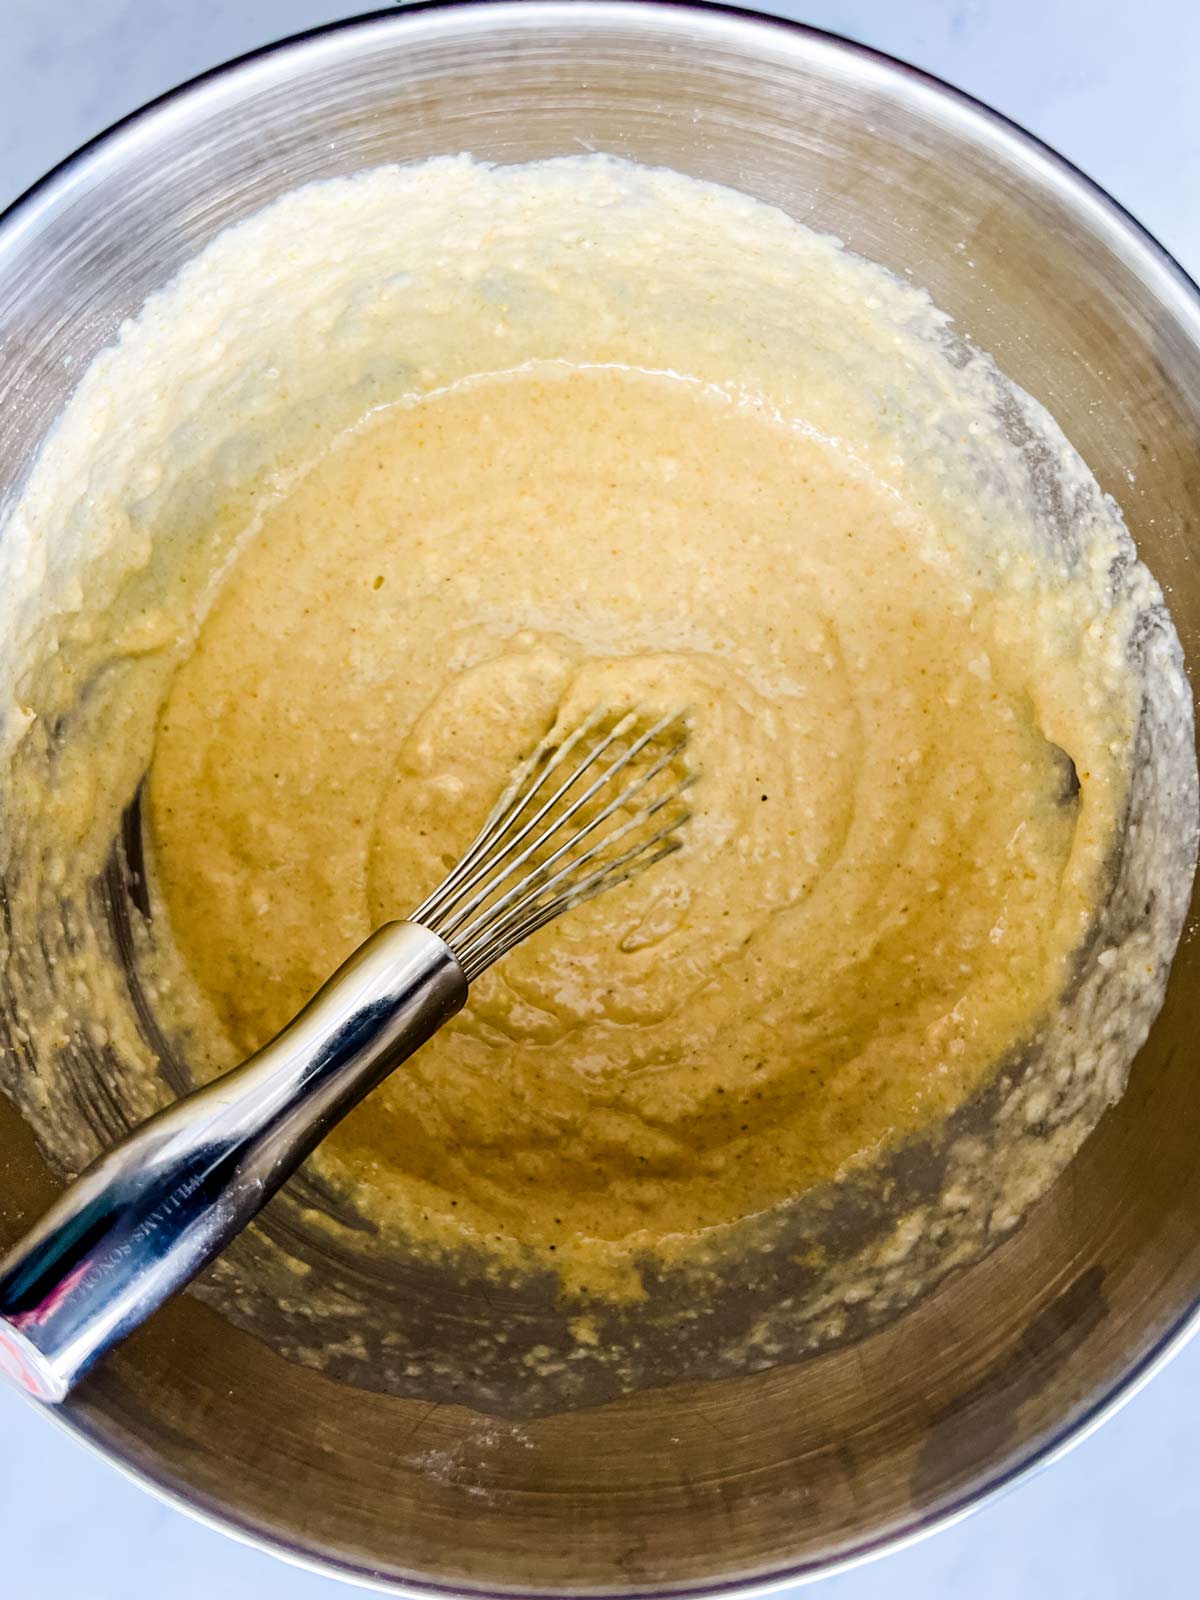 Cornbread mixture being whisked together in a large bowl.